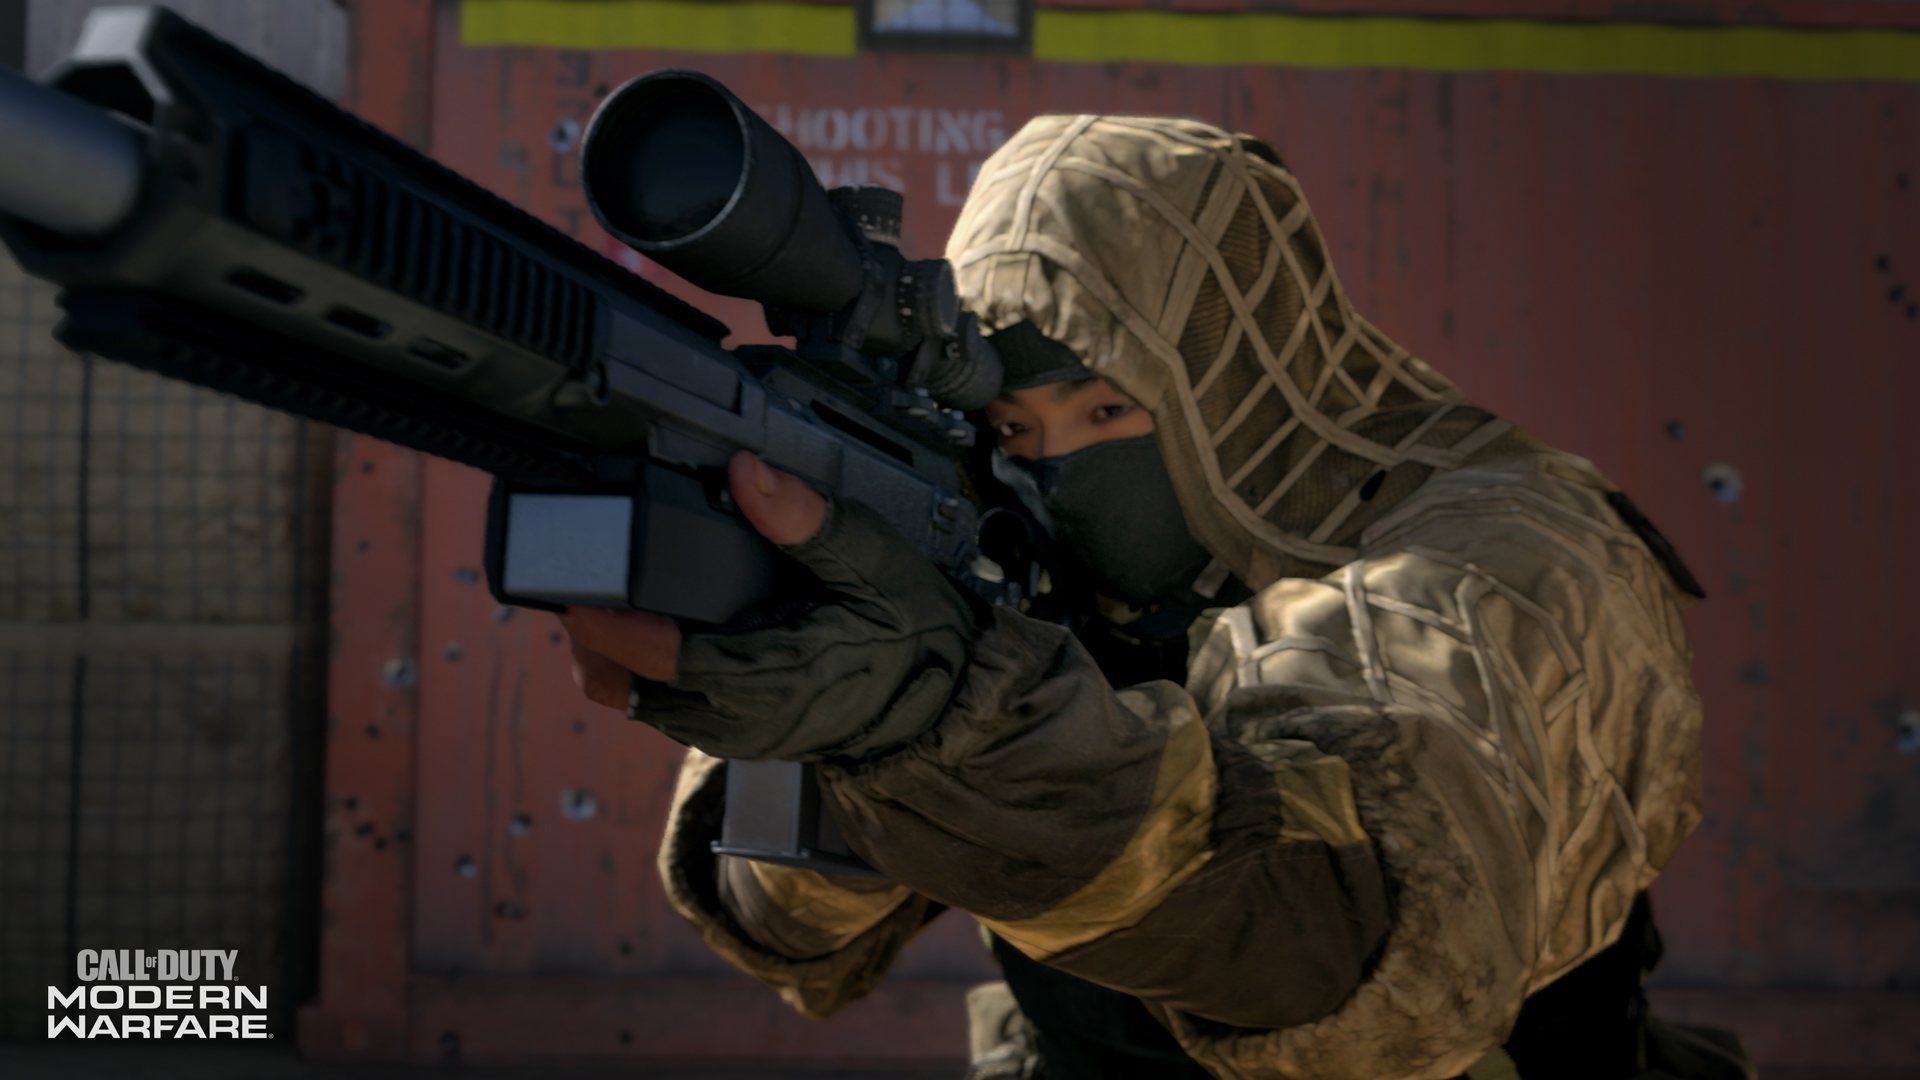 COD Modern Warfare 2019 uses darkness, recoil, and ATVs to inject new life  into the FPS